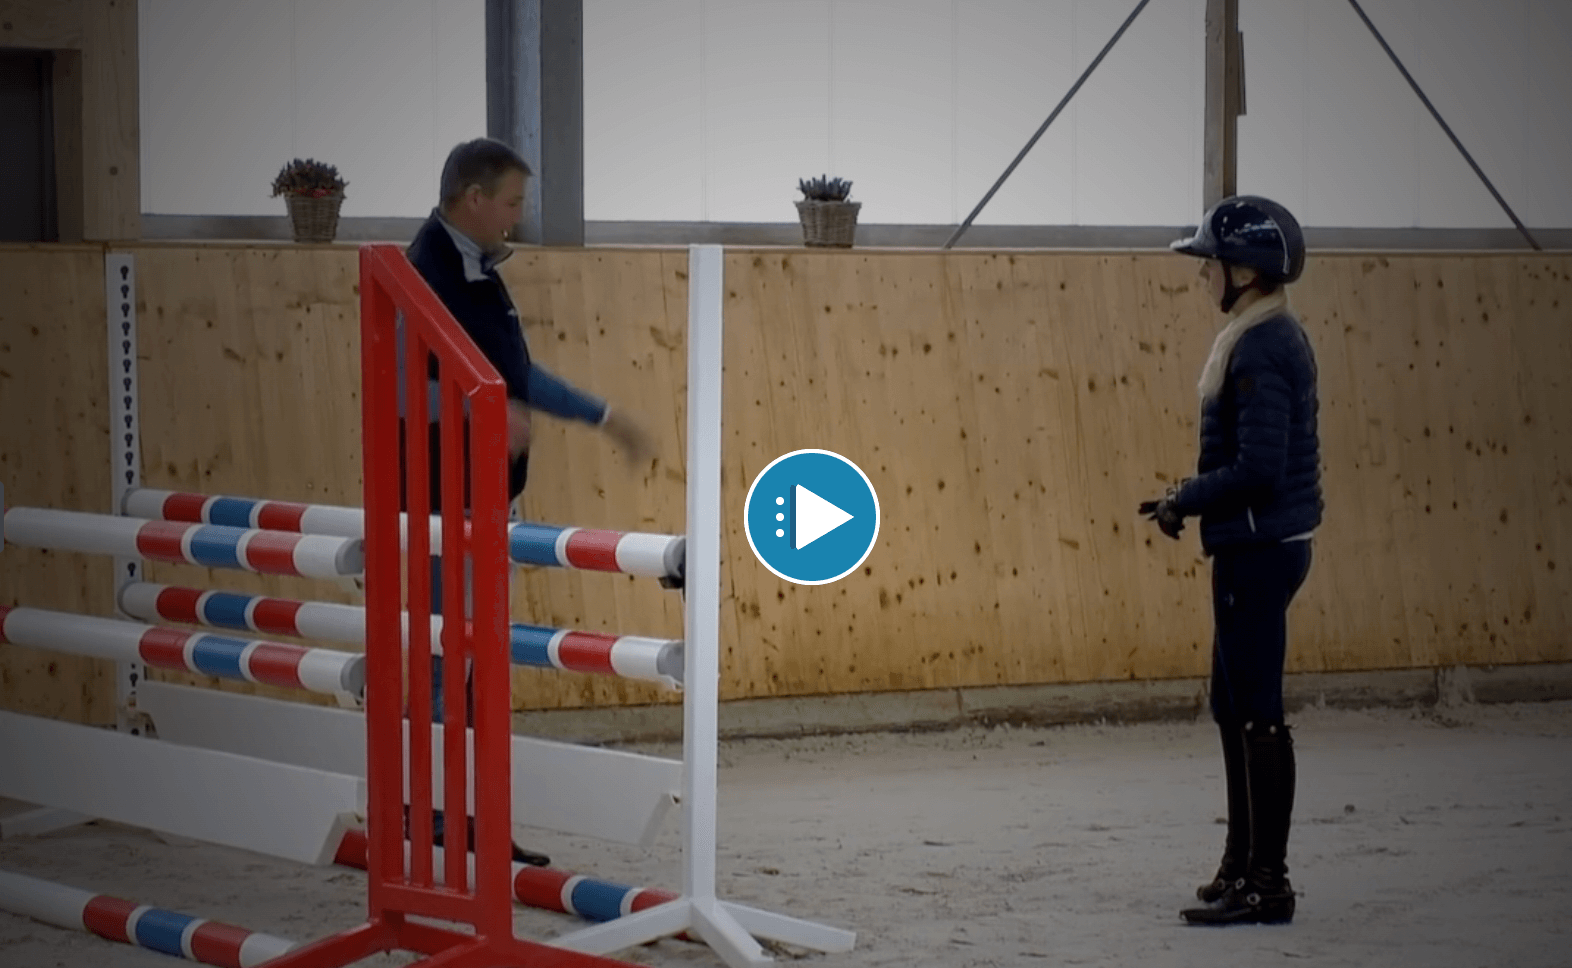 Franke Sloothaak shares exercises to Improve Body Control when Jumping